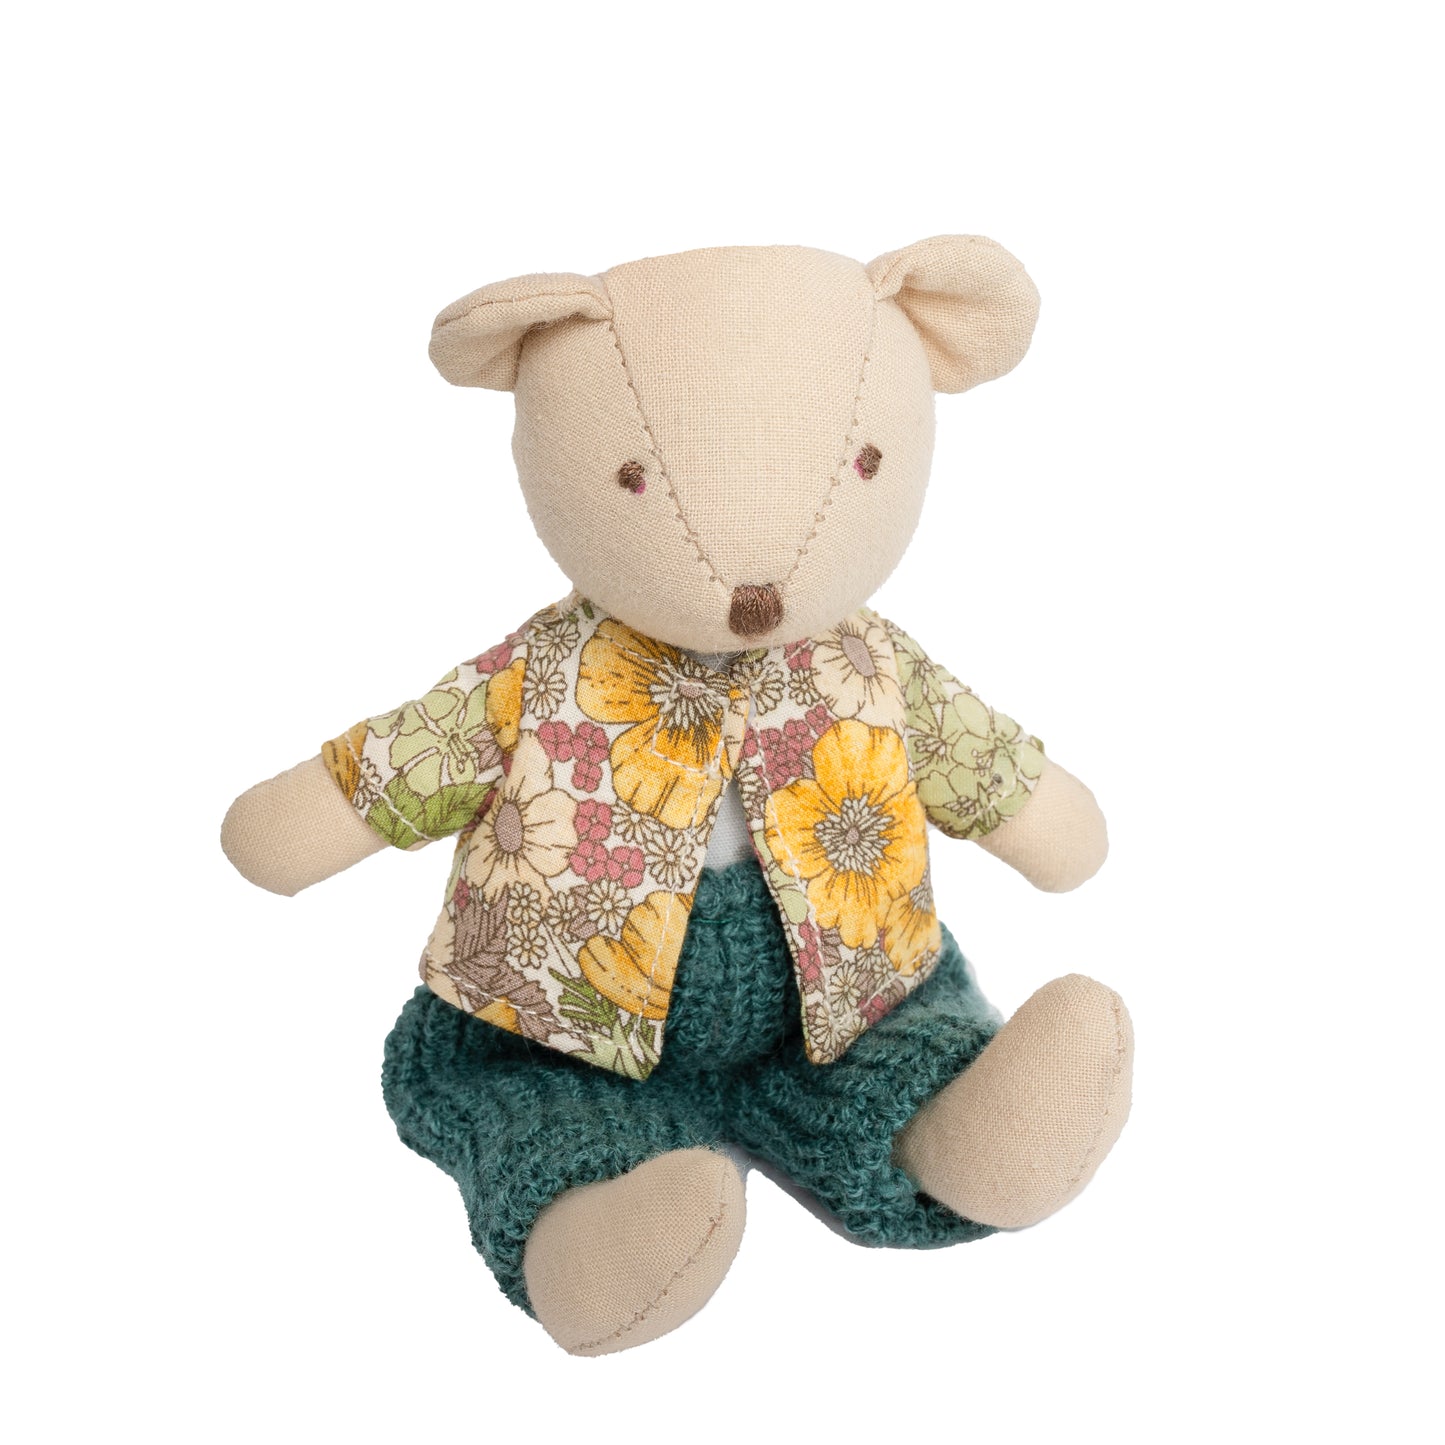 mini bear with knitted shorts snd suspenders